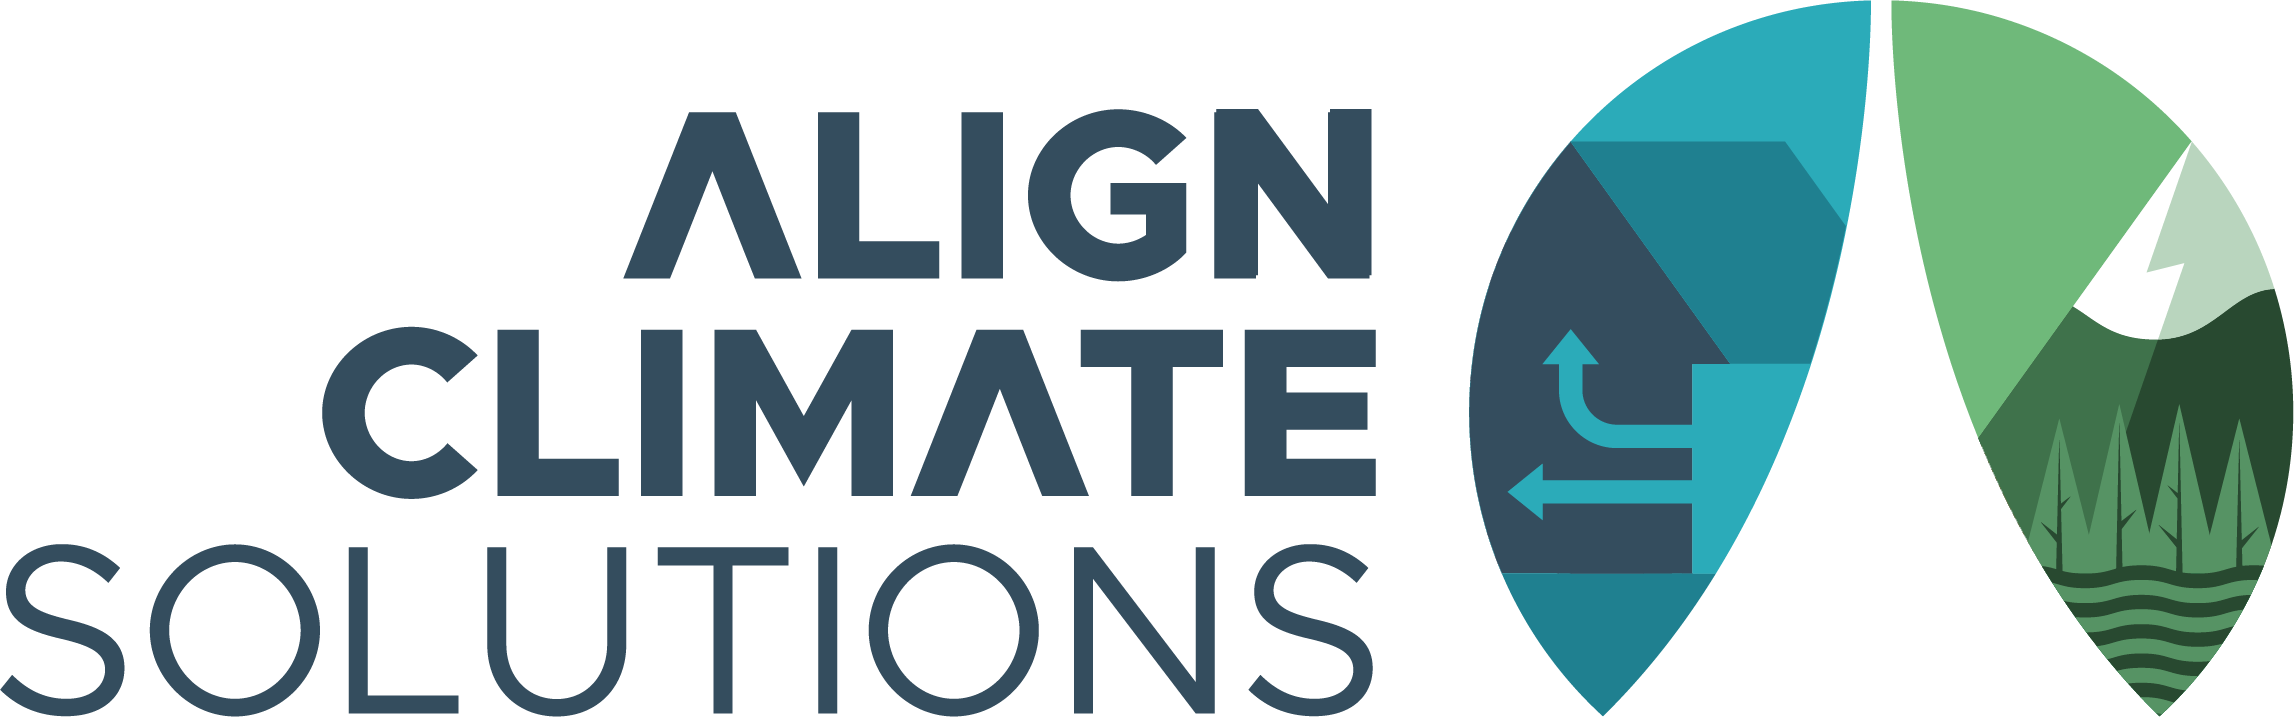 Align Climate Solutions